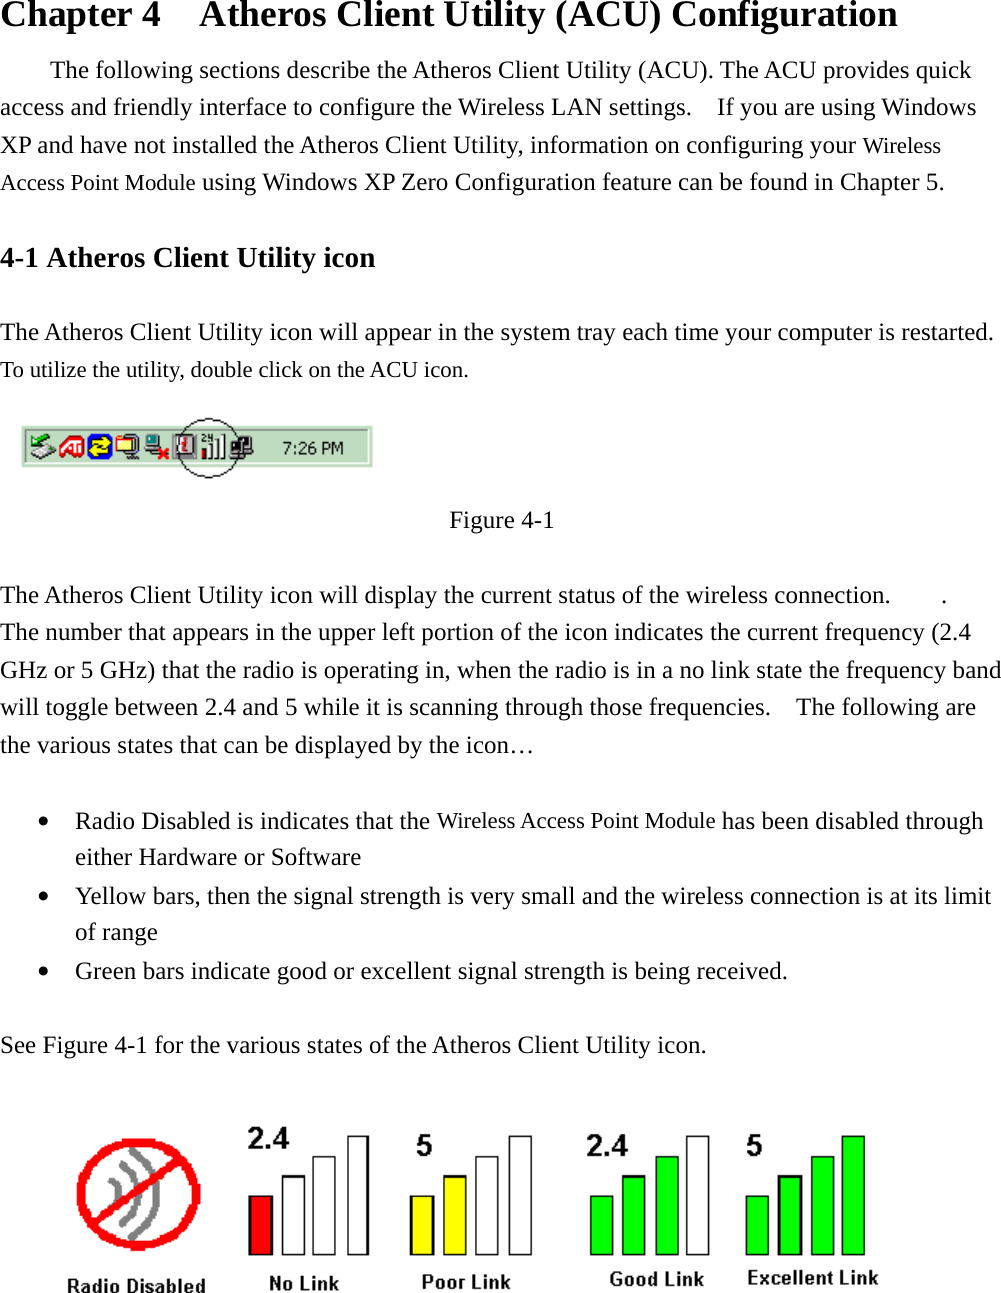  Chapter 4    Atheros Client Utility (ACU) Configuration The following sections describe the Atheros Client Utility (ACU). The ACU provides quick access and friendly interface to configure the Wireless LAN settings.    If you are using Windows XP and have not installed the Atheros Client Utility, information on configuring your Wireless Access Point Module using Windows XP Zero Configuration feature can be found in Chapter 5.    4-1 Atheros Client Utility icon    The Atheros Client Utility icon will appear in the system tray each time your computer is restarted.     To utilize the utility, double click on the ACU icon.  Figure 4-1  The Atheros Client Utility icon will display the current status of the wireless connection.        .   The number that appears in the upper left portion of the icon indicates the current frequency (2.4 GHz or 5 GHz) that the radio is operating in, when the radio is in a no link state the frequency band will toggle between 2.4 and 5 while it is scanning through those frequencies.    The following are the various states that can be displayed by the icon…  •  Radio Disabled is indicates that the Wireless Access Point Module has been disabled through either Hardware or Software •  Yellow bars, then the signal strength is very small and the wireless connection is at its limit of range •  Green bars indicate good or excellent signal strength is being received.    See Figure 4-1 for the various states of the Atheros Client Utility icon.    